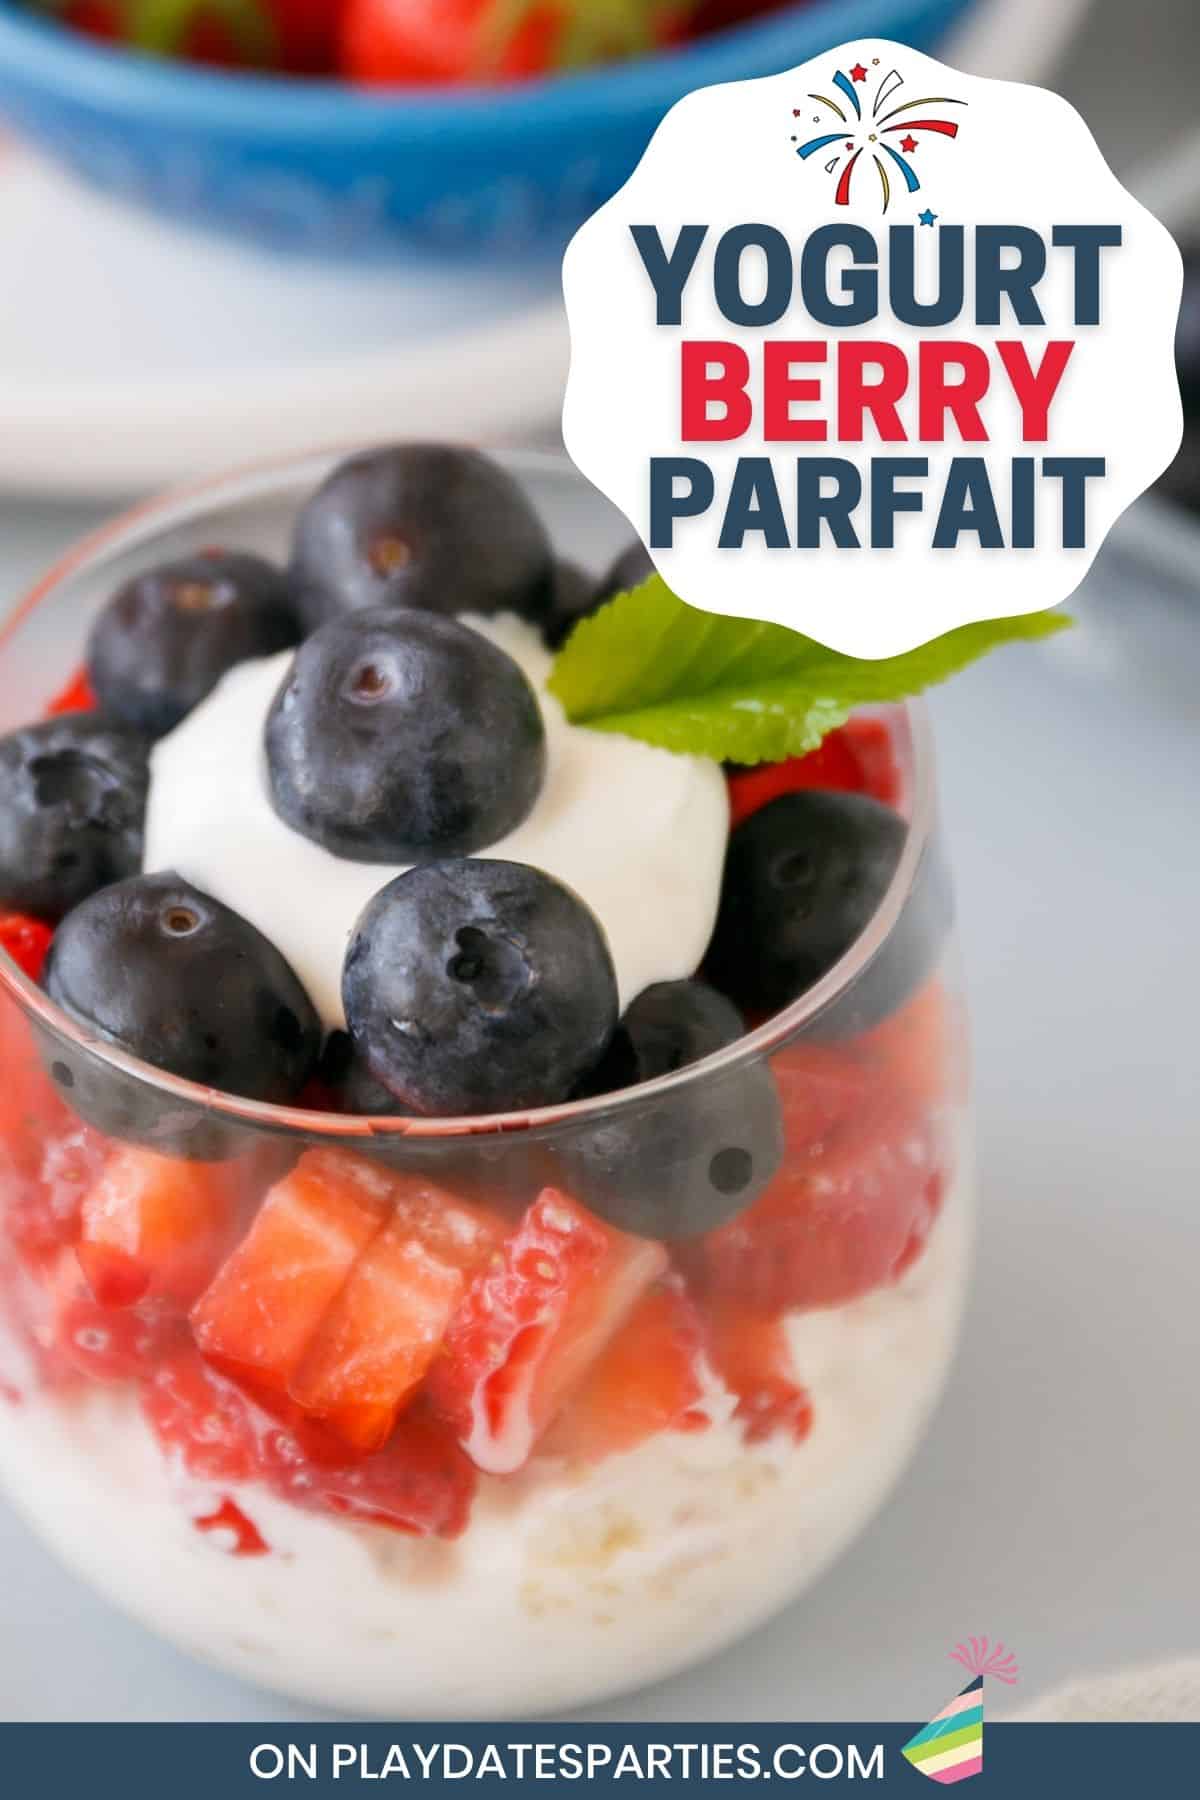 Red white and blue parfait for July 4th with text overlay Yogurt berry parfait.